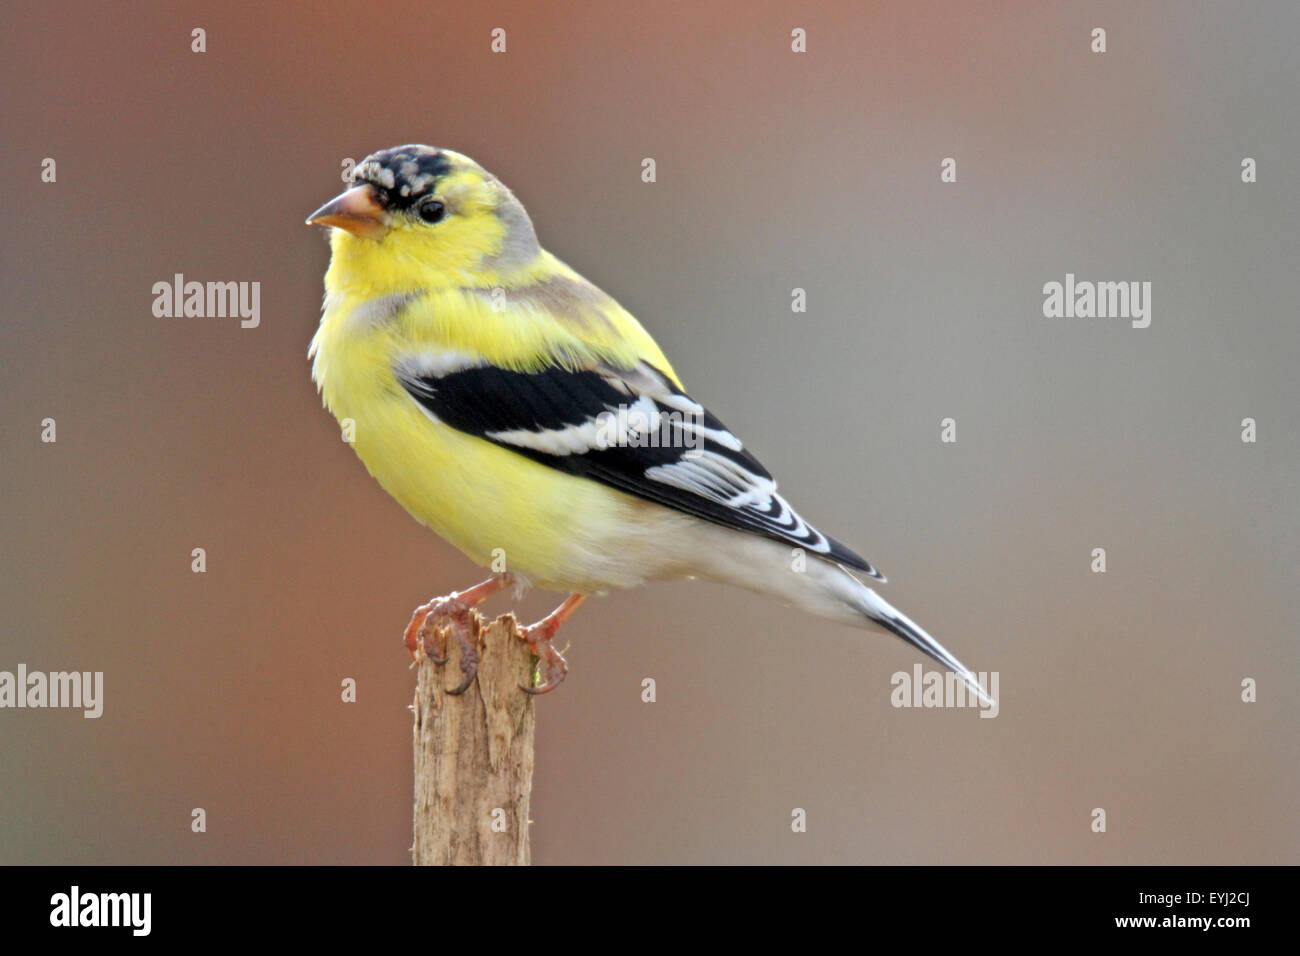 An American Goldfinch (Carduelis tristis) starting it's springtime moult to more vibrant yellow summer breeding plumage Stock Photo